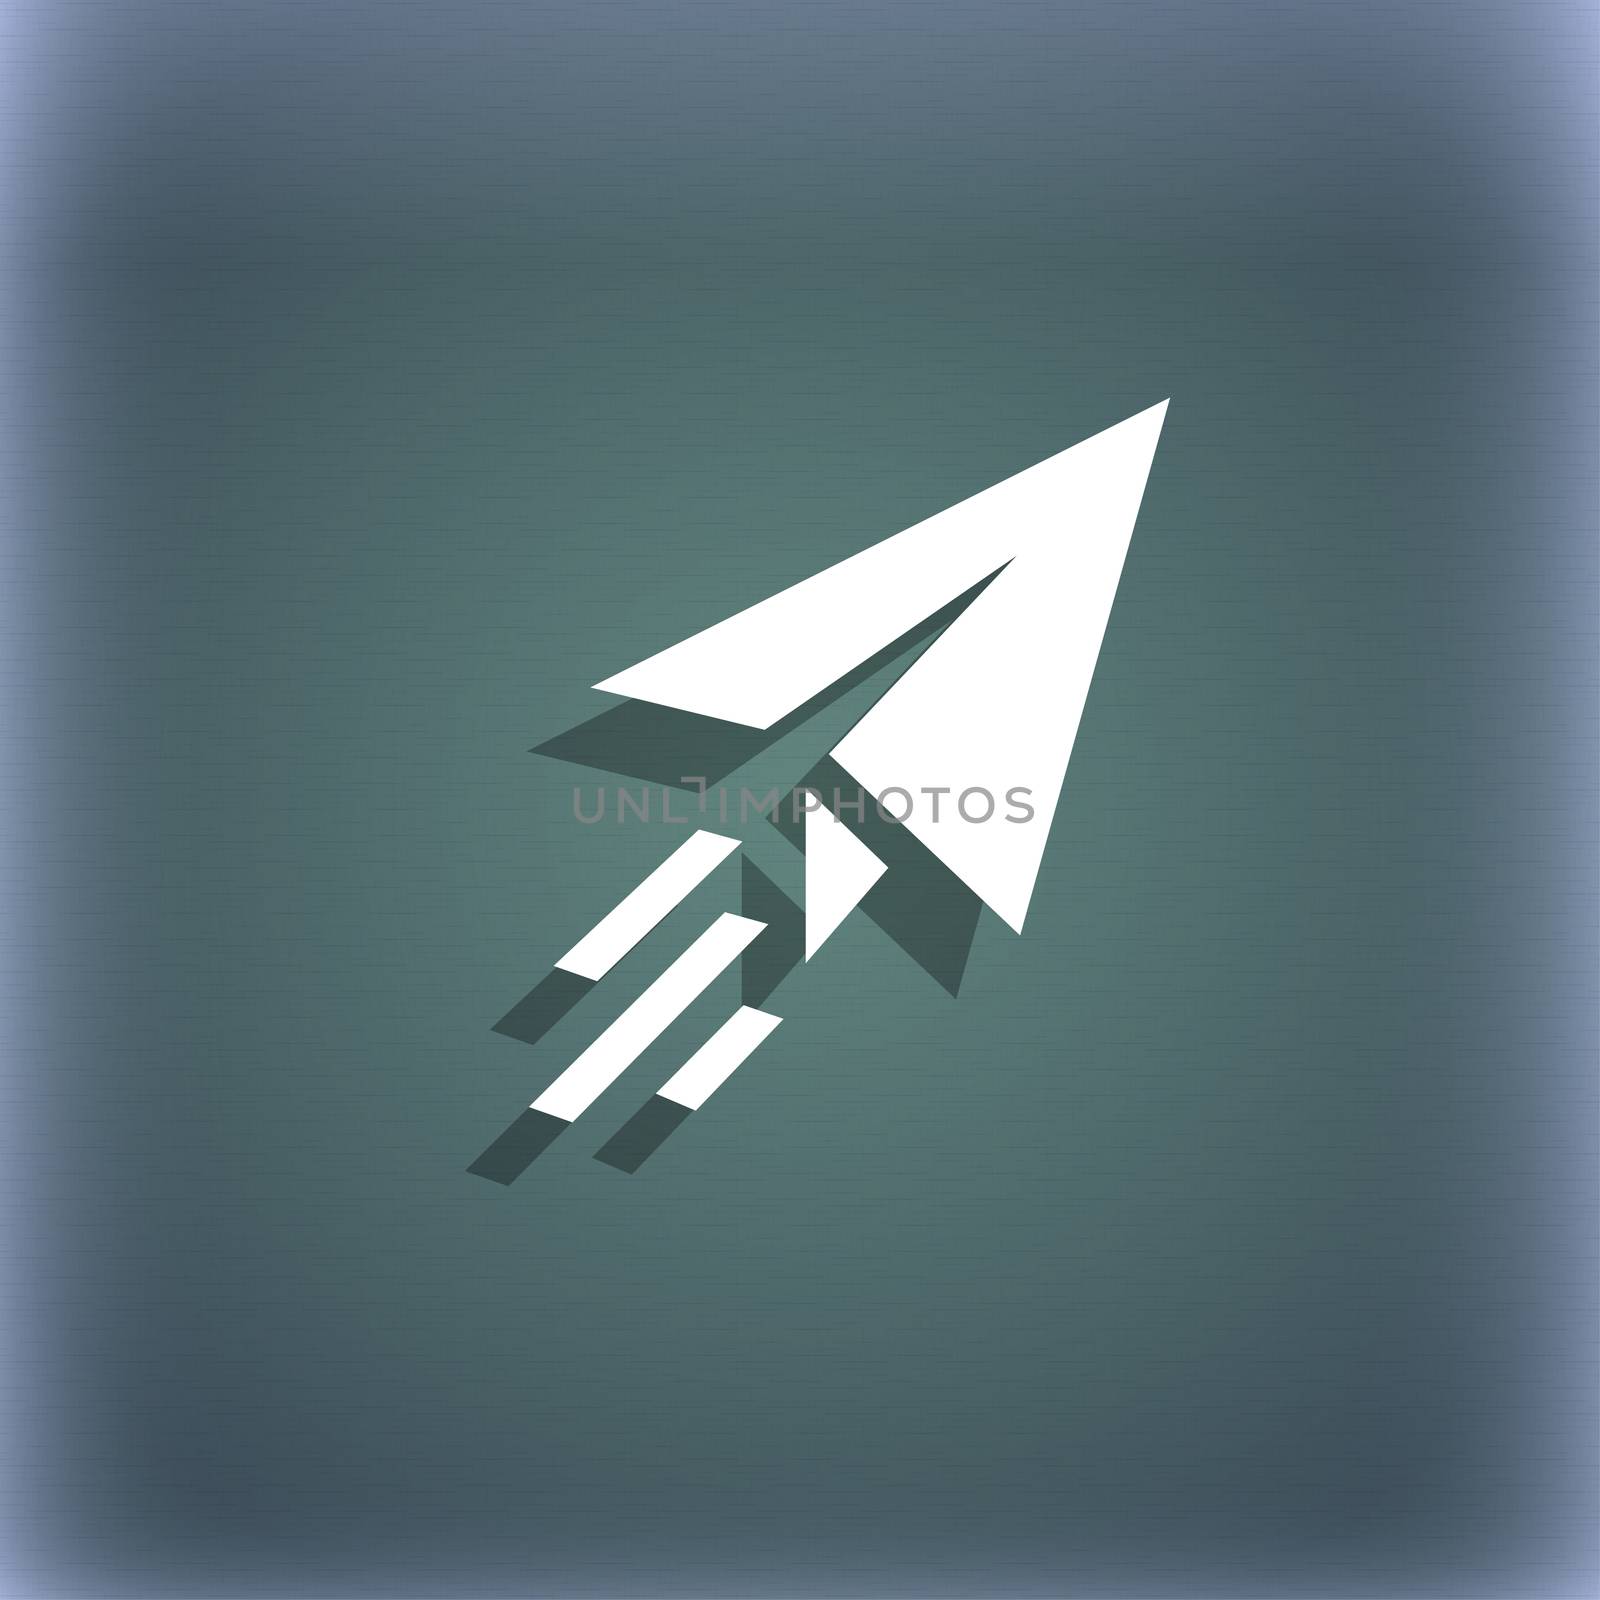 Paper airplane icon symbol on the blue-green abstract background with shadow and space for your text. illustration